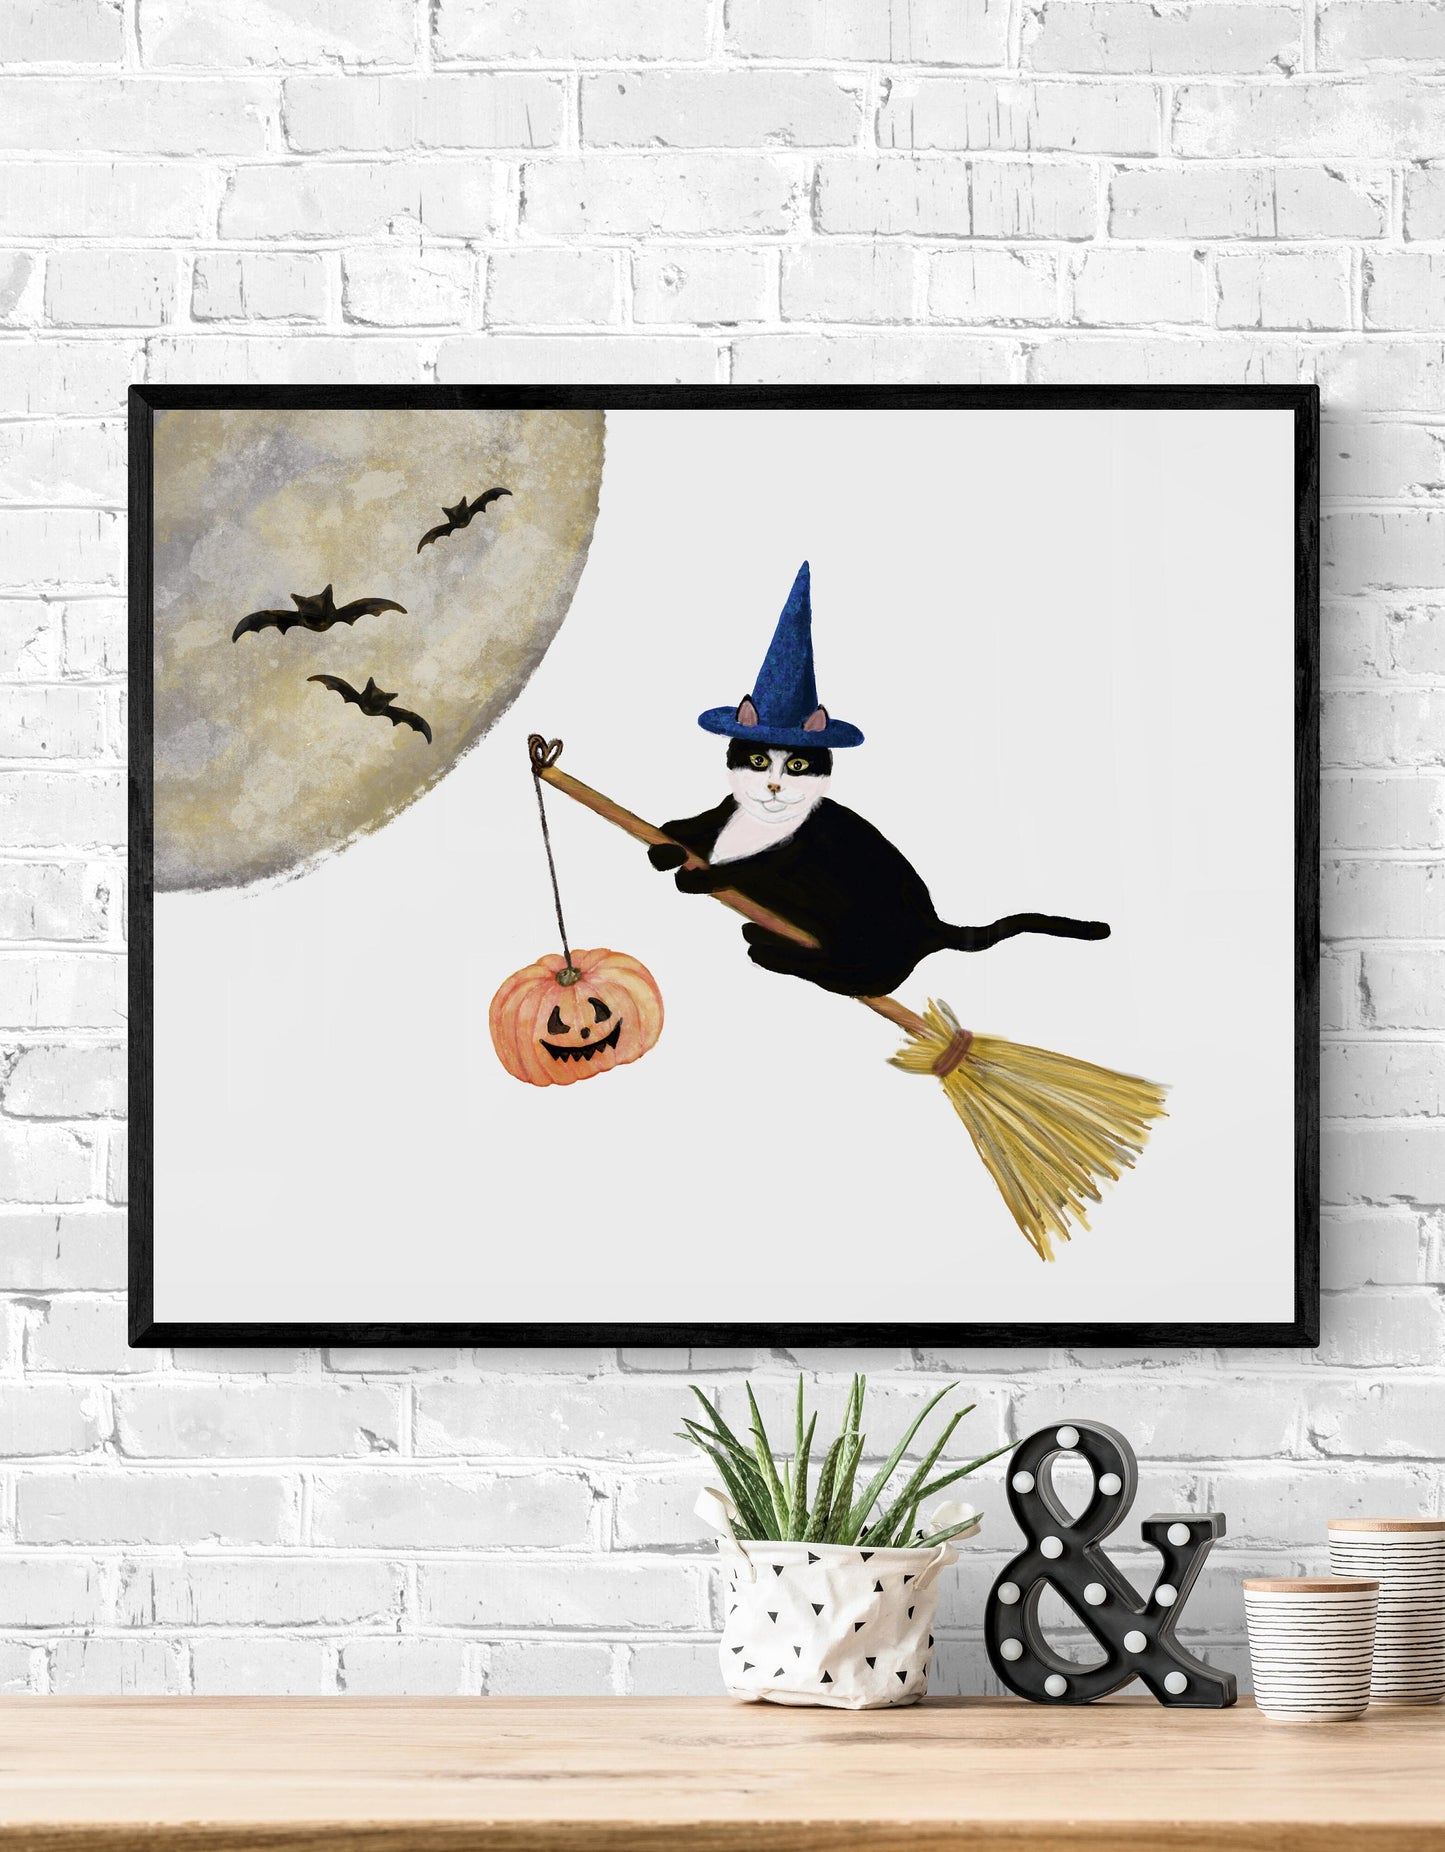 Tuxedo Cat Flying with a Broom Print, Halloween Cat Painting, Black and White Cat Portrait, Holiday Wall Art, Tuxedo Cat Flying with Bats